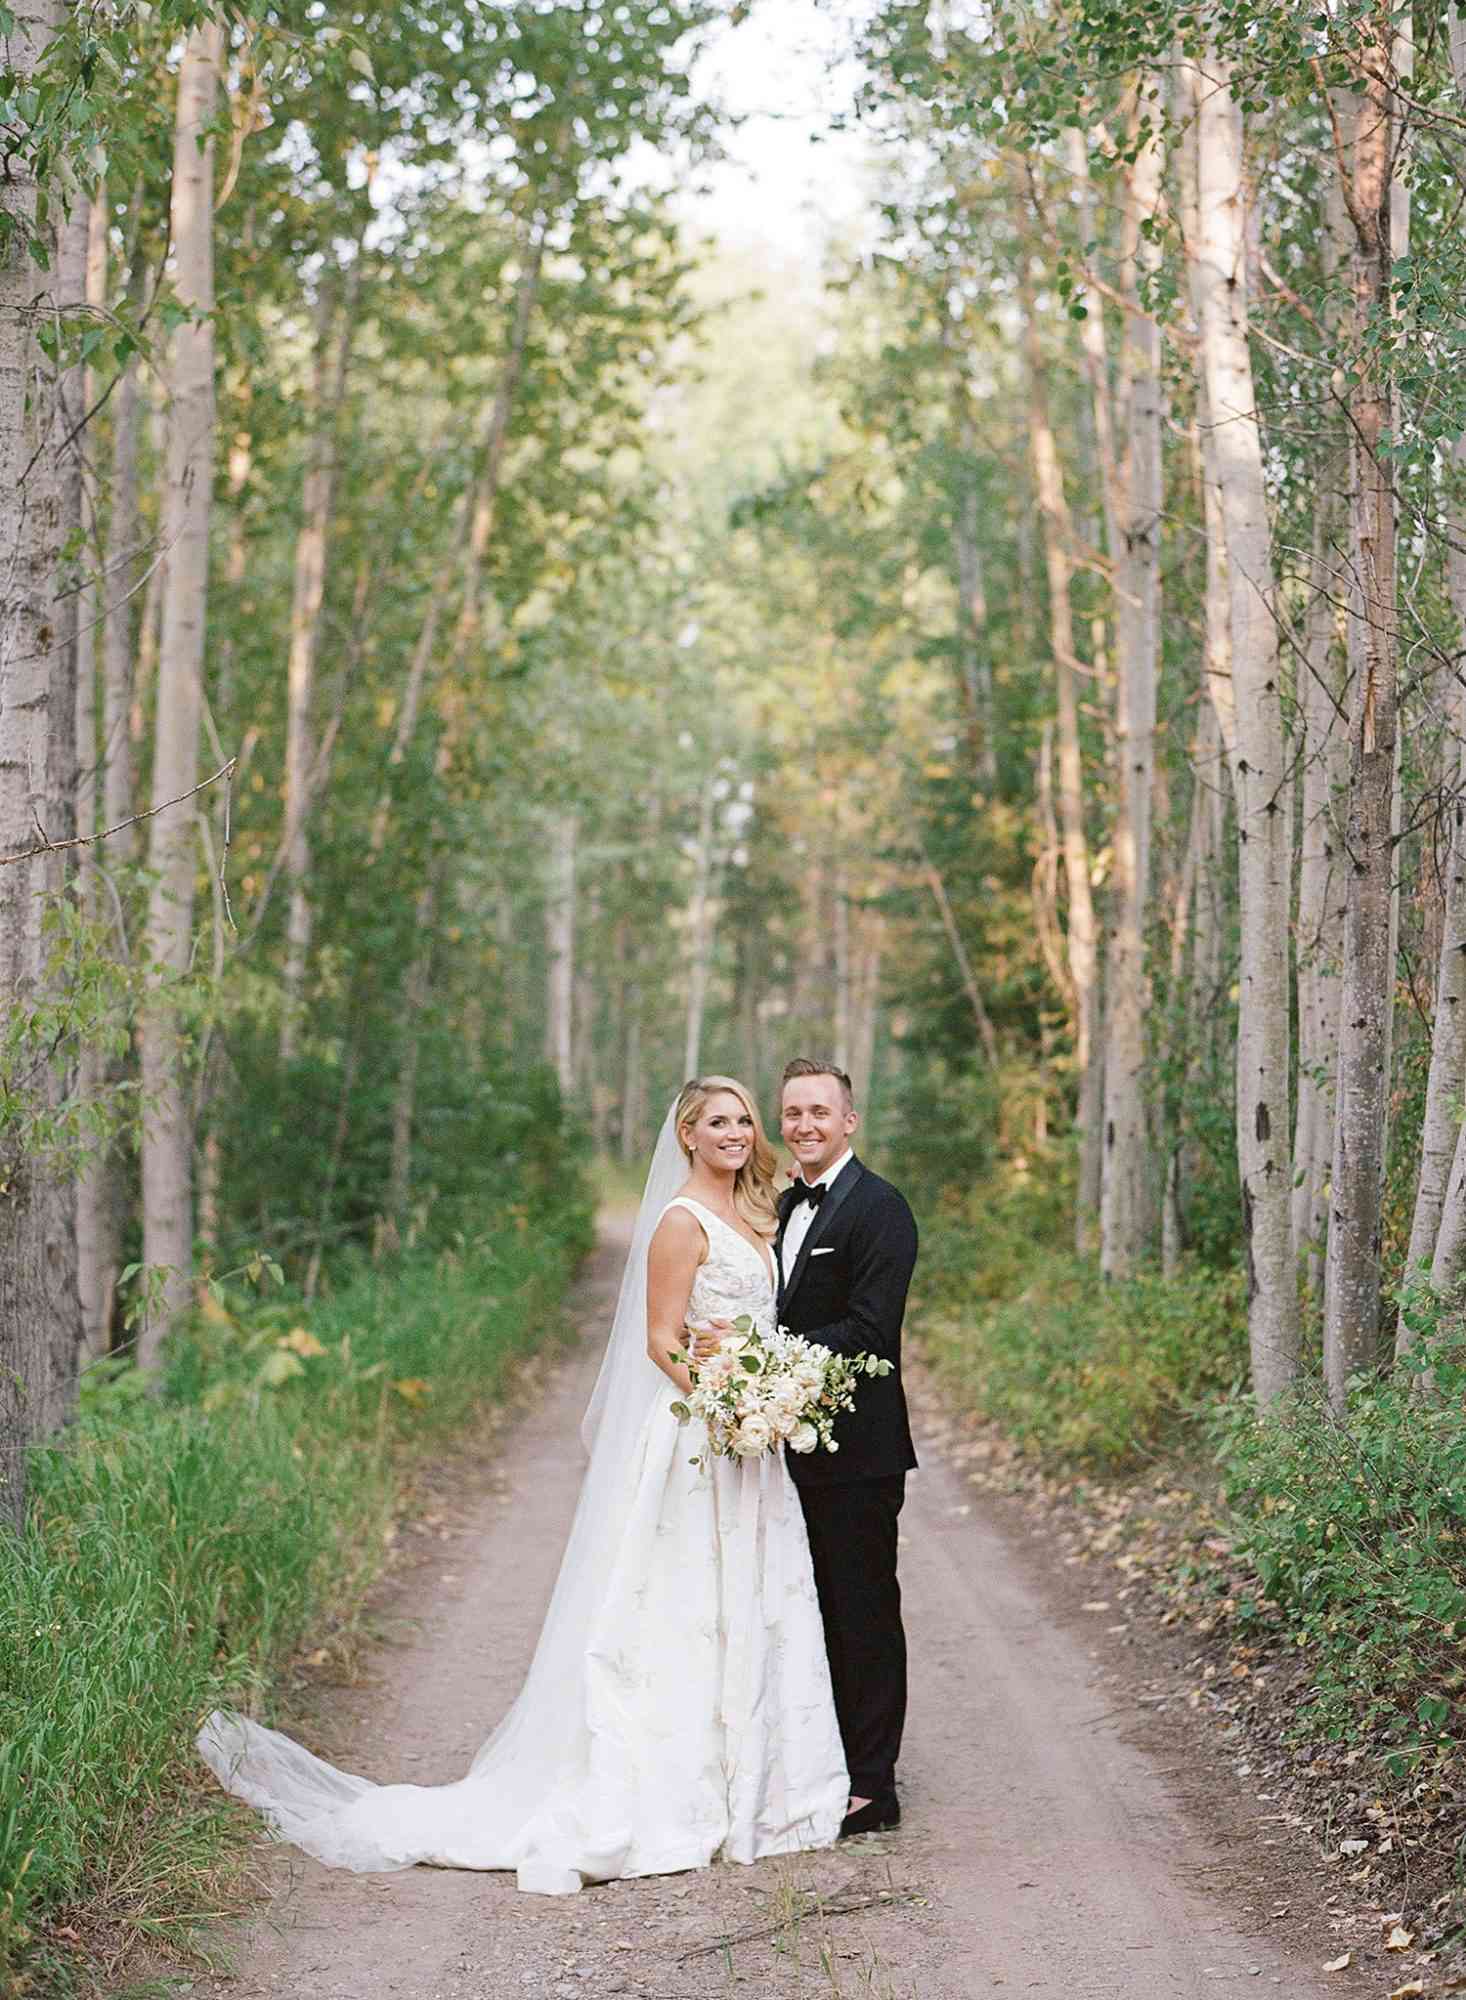 kaitlin jeremy wedding couple on tree-lined path